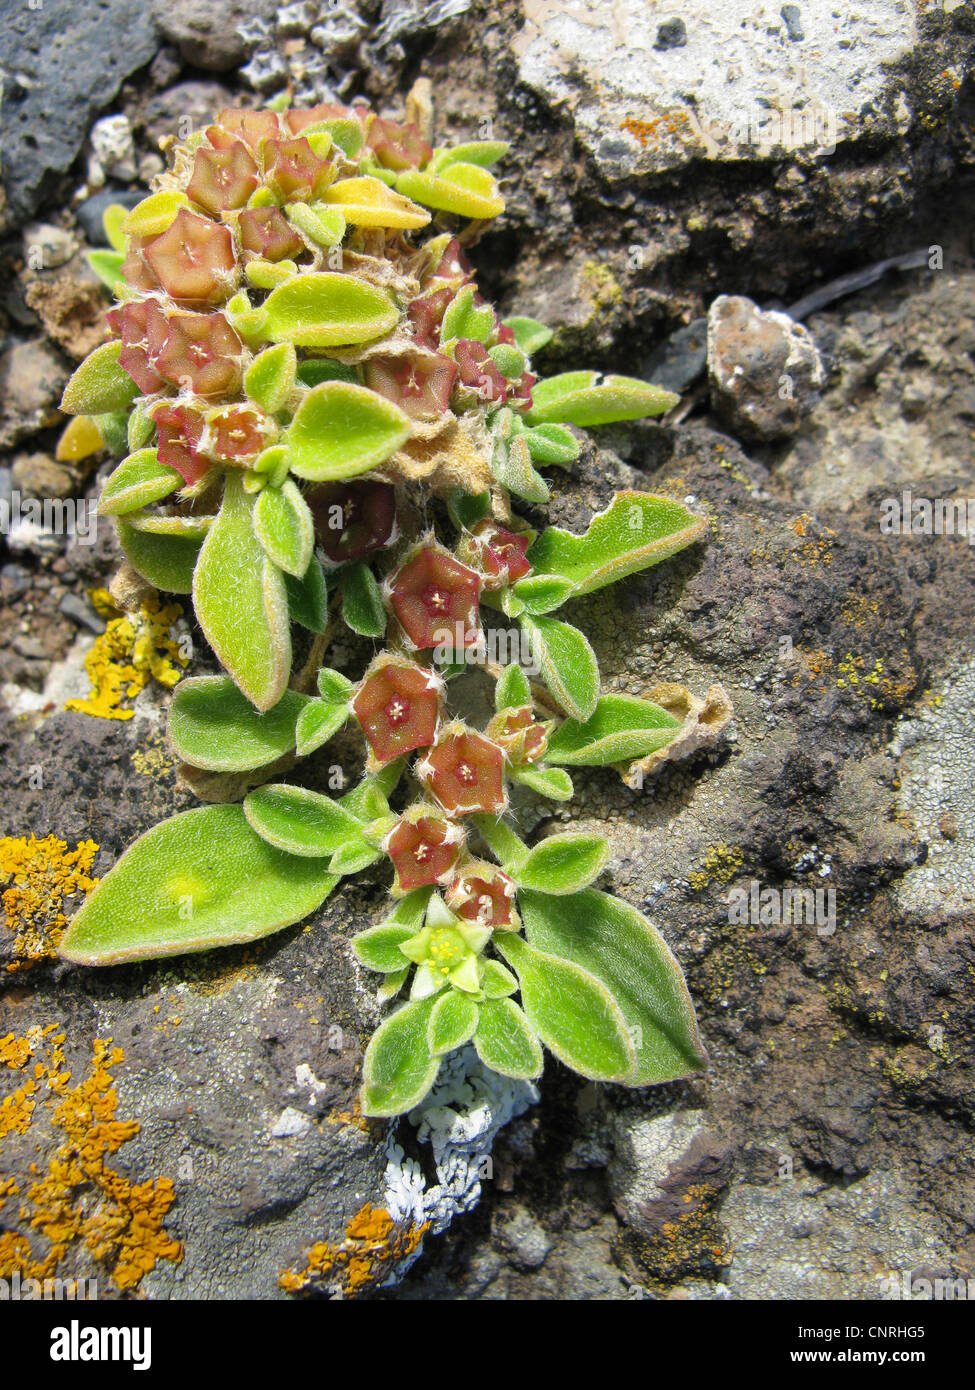 Canarian Iceplant, Canary Iceplant (Aizoon canariense, Aizoon canariensis), blooming and fruiting ob gravelly ground, Canary Islands, Tenerife Stock Photo